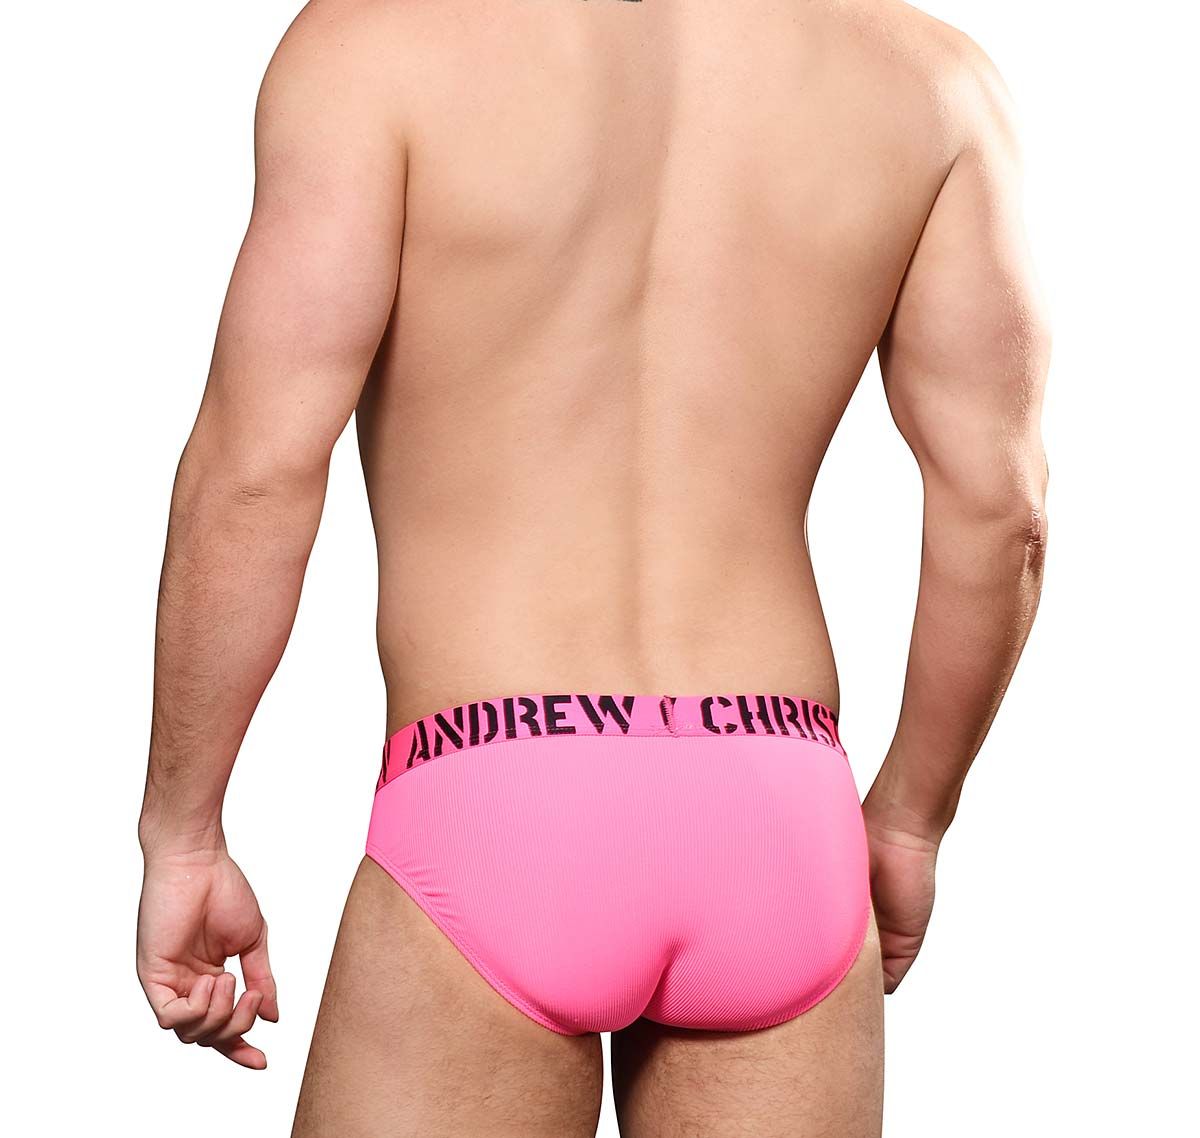 Andrew Christian Slip HOTNESS RIB BRIEF w/ ALMOST NAKED 92879, rose